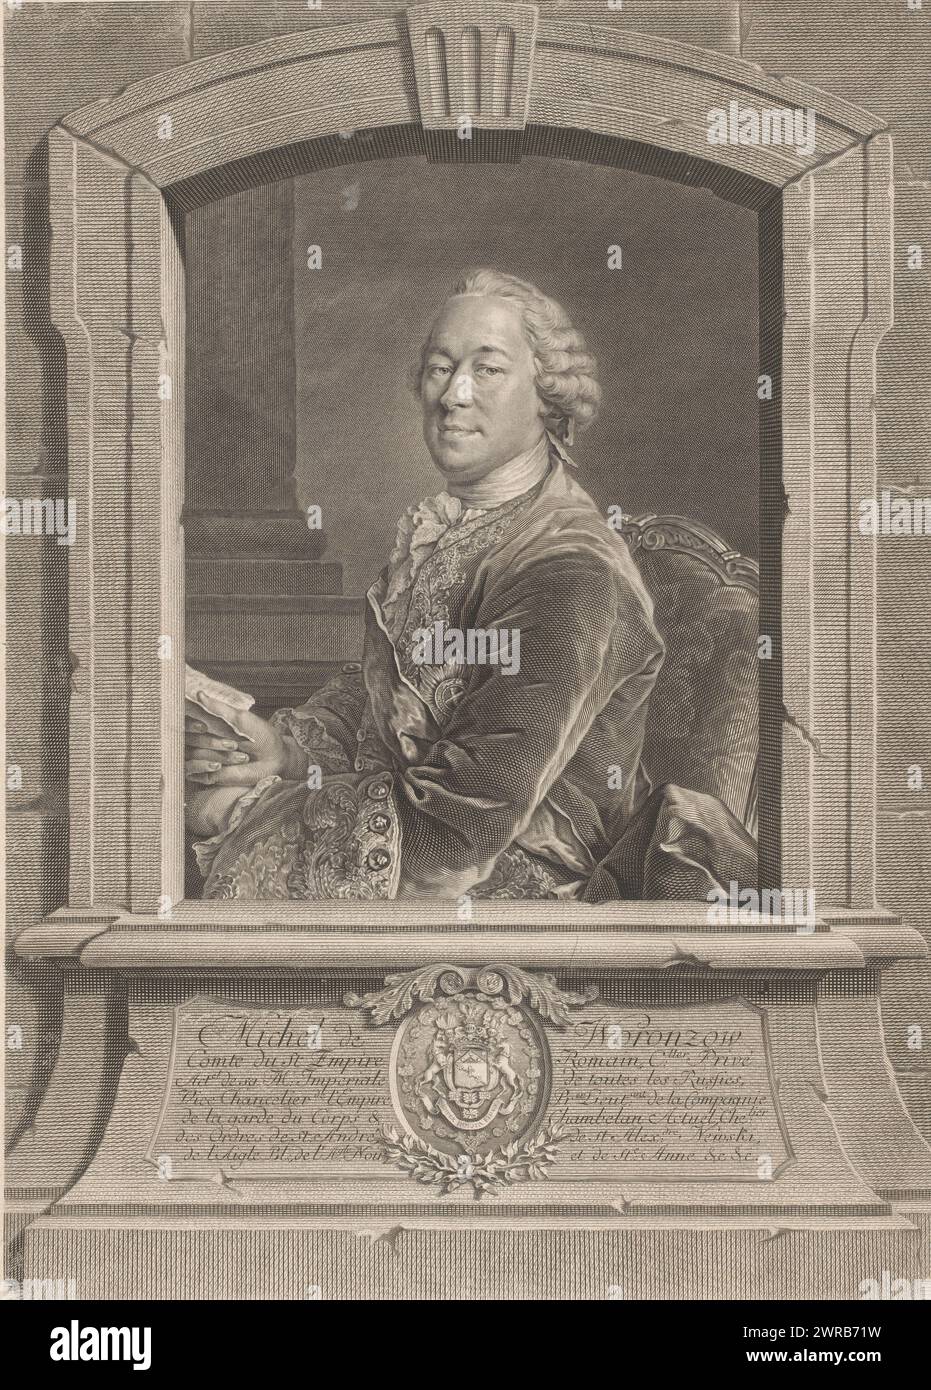 Portrait of Mikhail Illarionovich Vorontsov, print maker: Georg Friedrich Schmidt, after painting by: Louis Tocqué, Sint-Petersburg, 1758, paper, engraving, etching, height 443 mm × width 323 mm, print Stock Photo